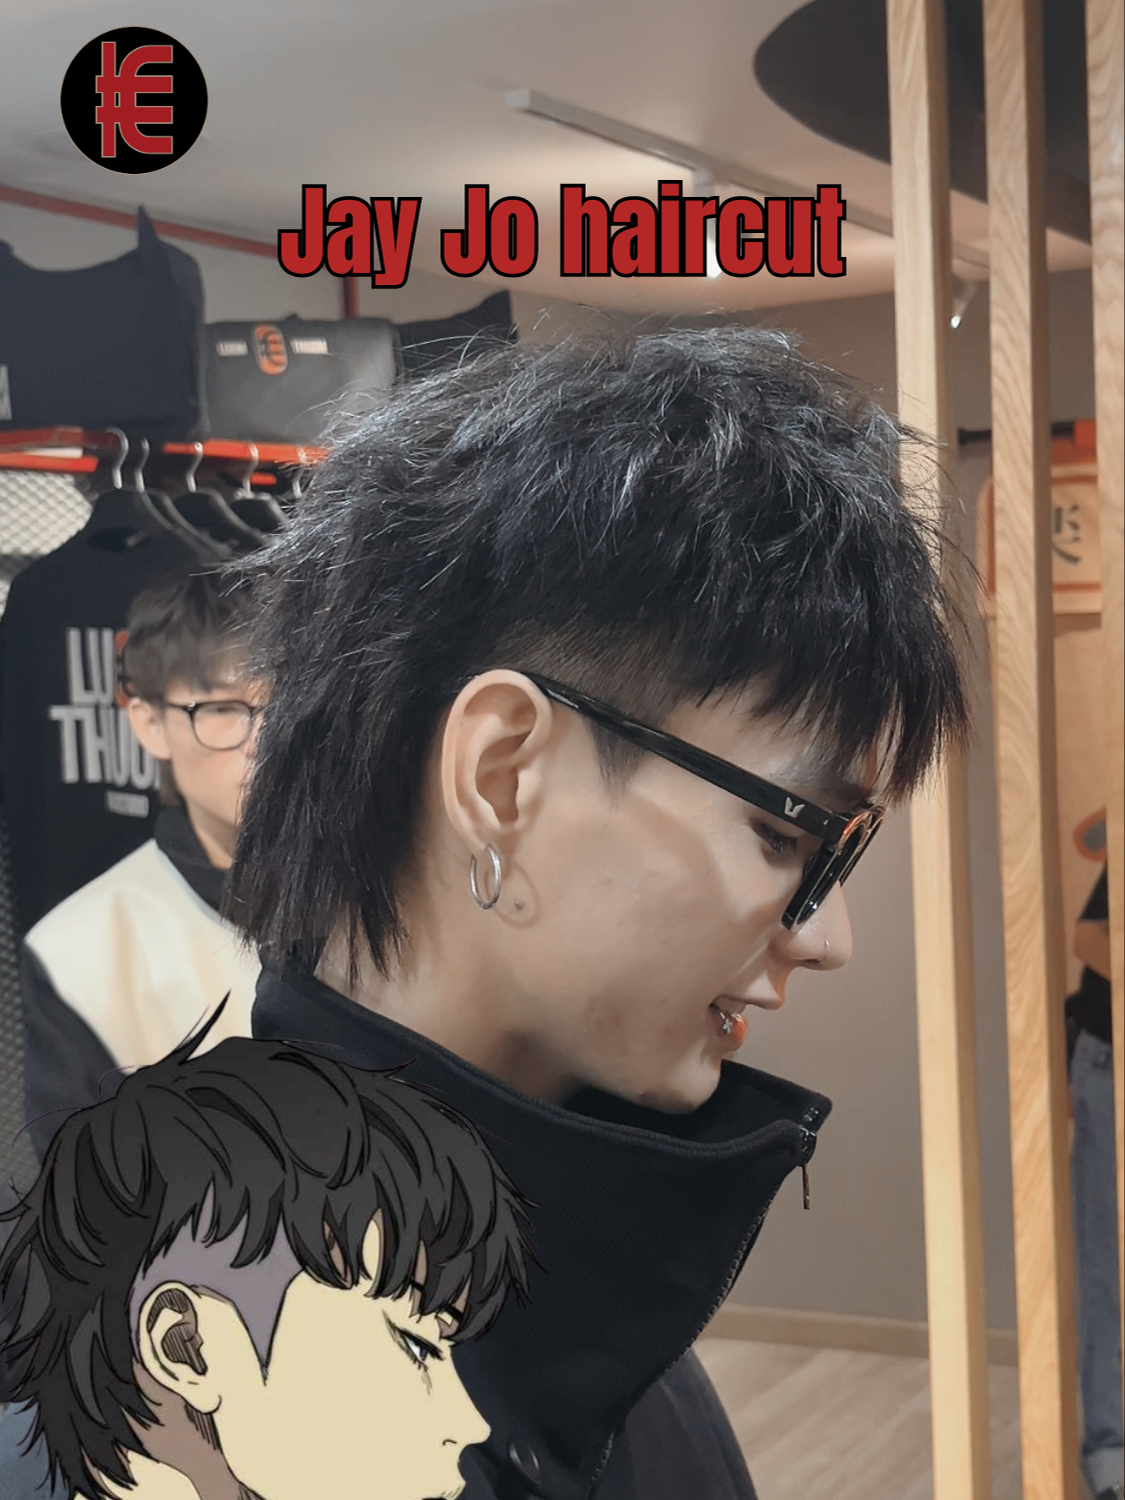 JayJo mullet haircut by luomthuom hairstudio #luomthuom #jayjomullet #luomthuomhairstudio #windbreaker